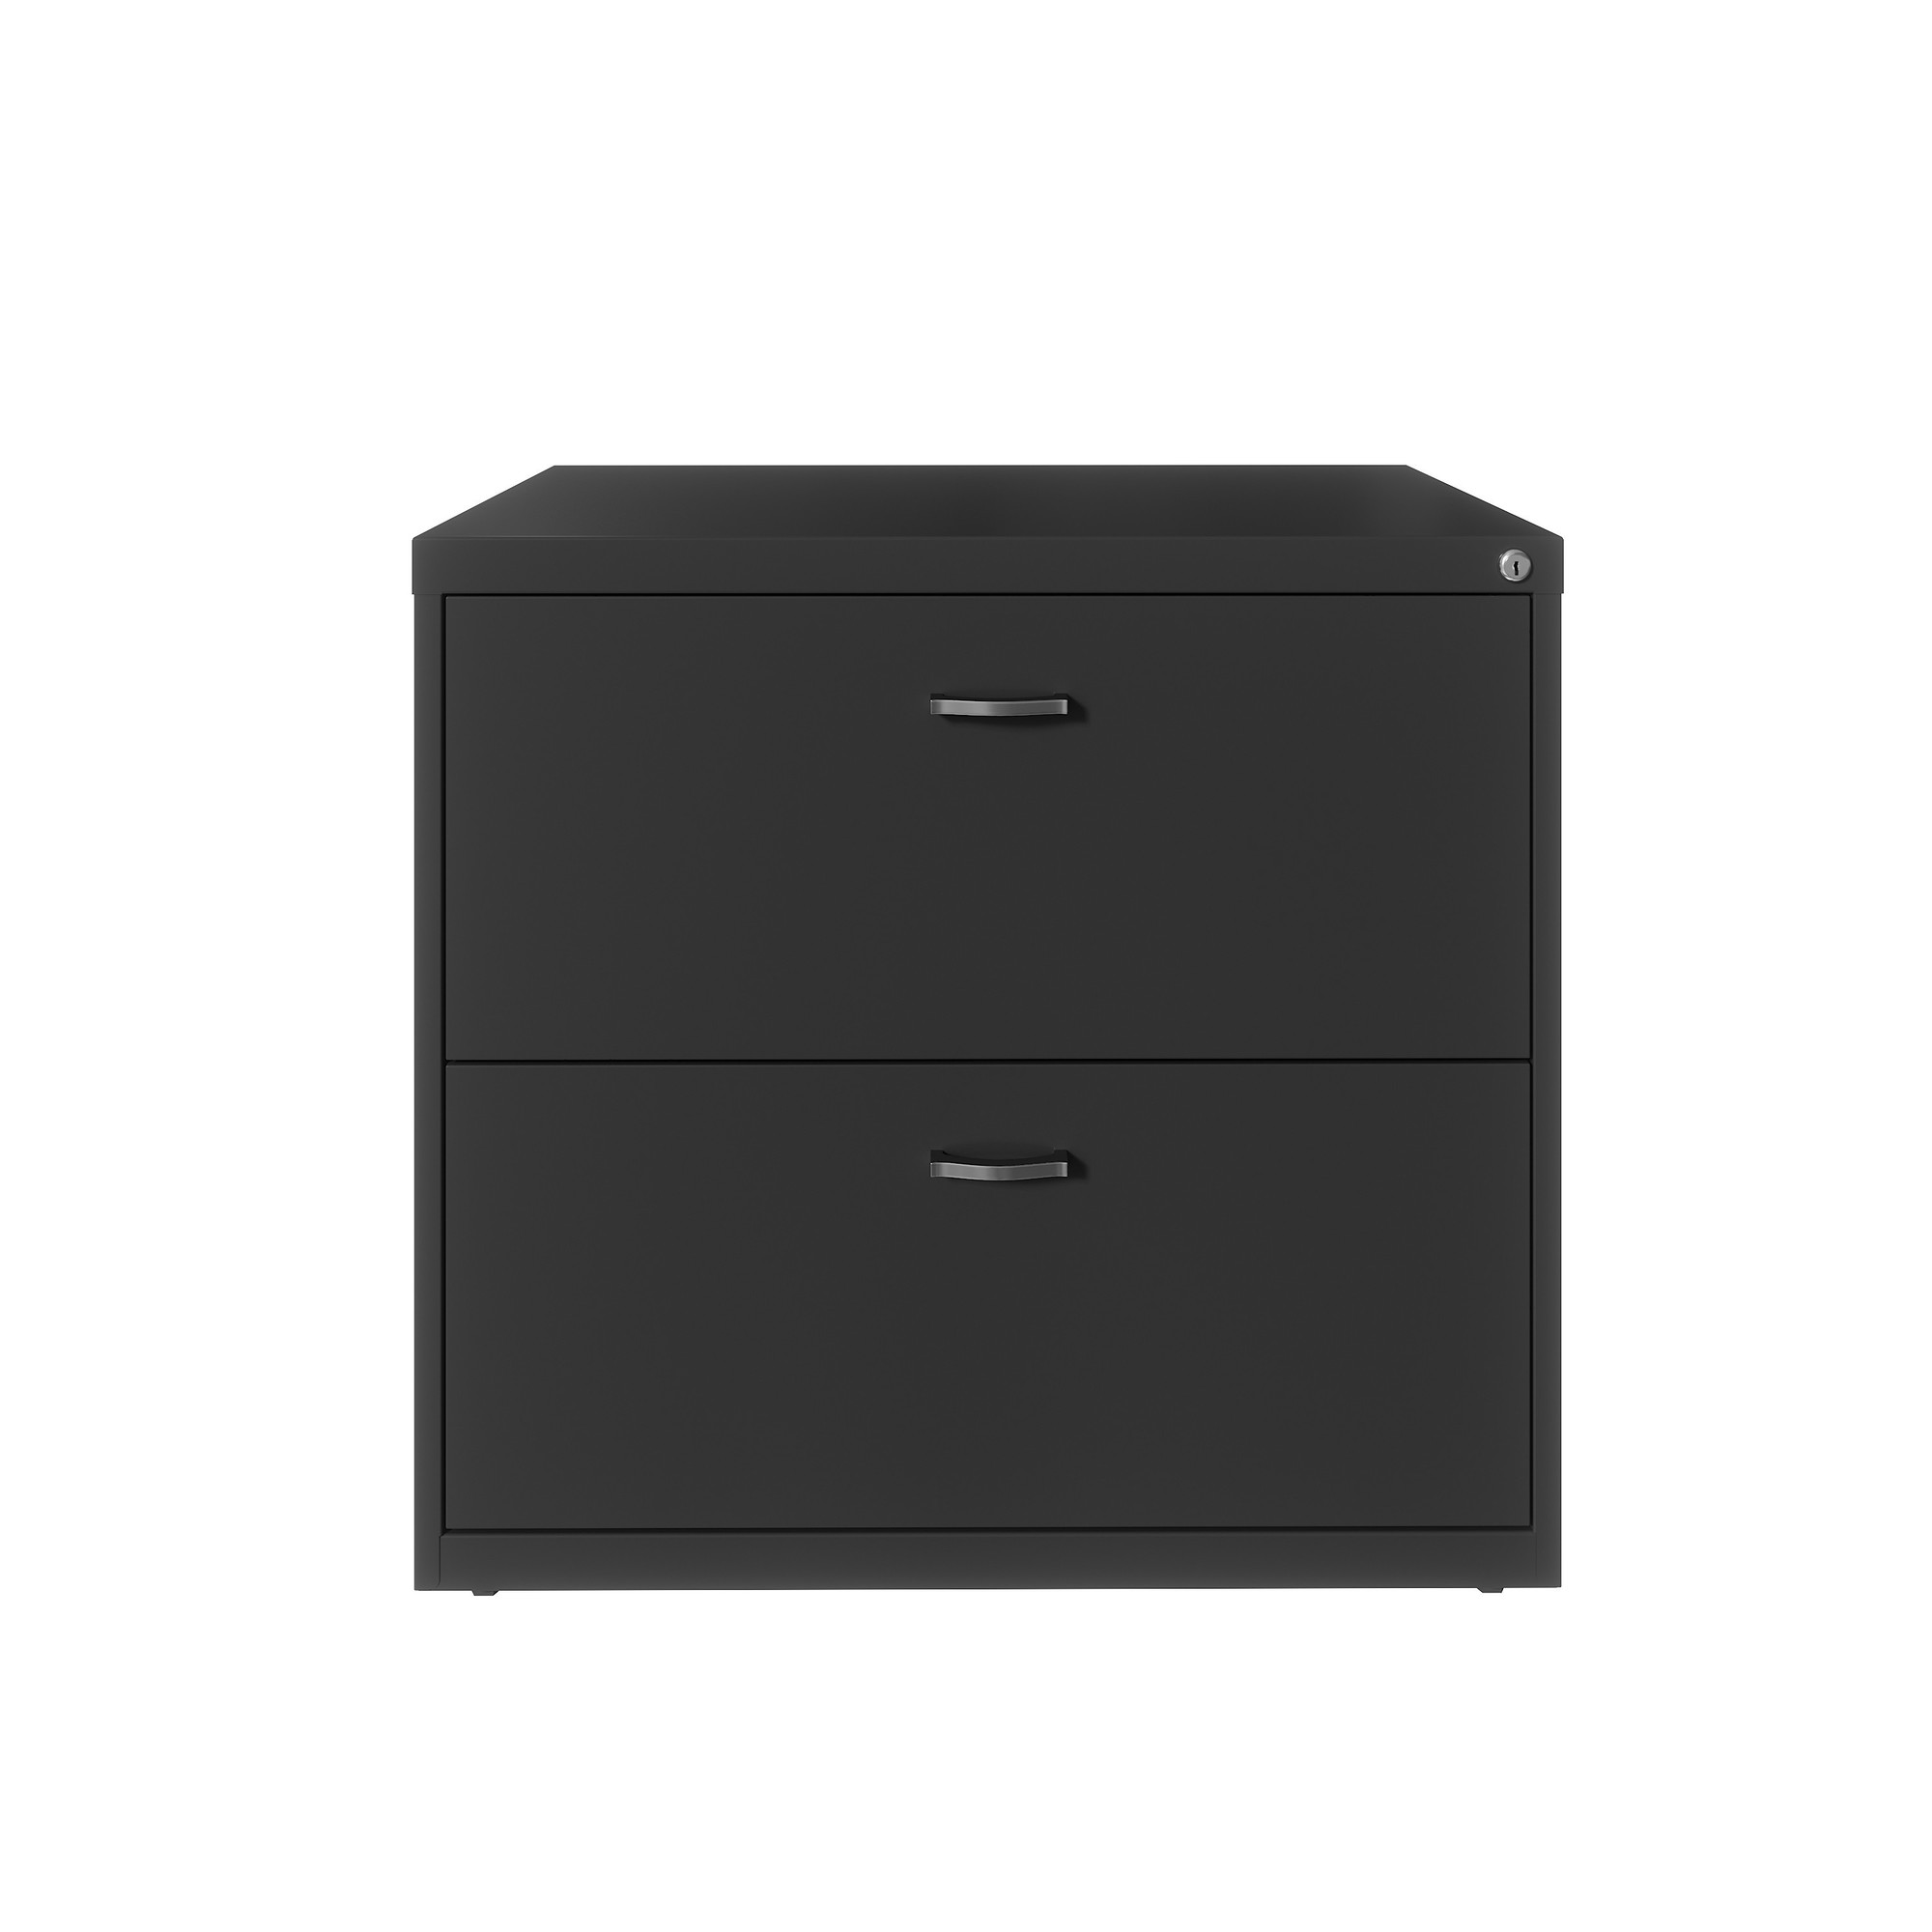 Hirsh Industries, 2 Drawer Lateral File Cabinet, Width 30 in, Depth 17.63 in, Height 27.75 in, Model 23925